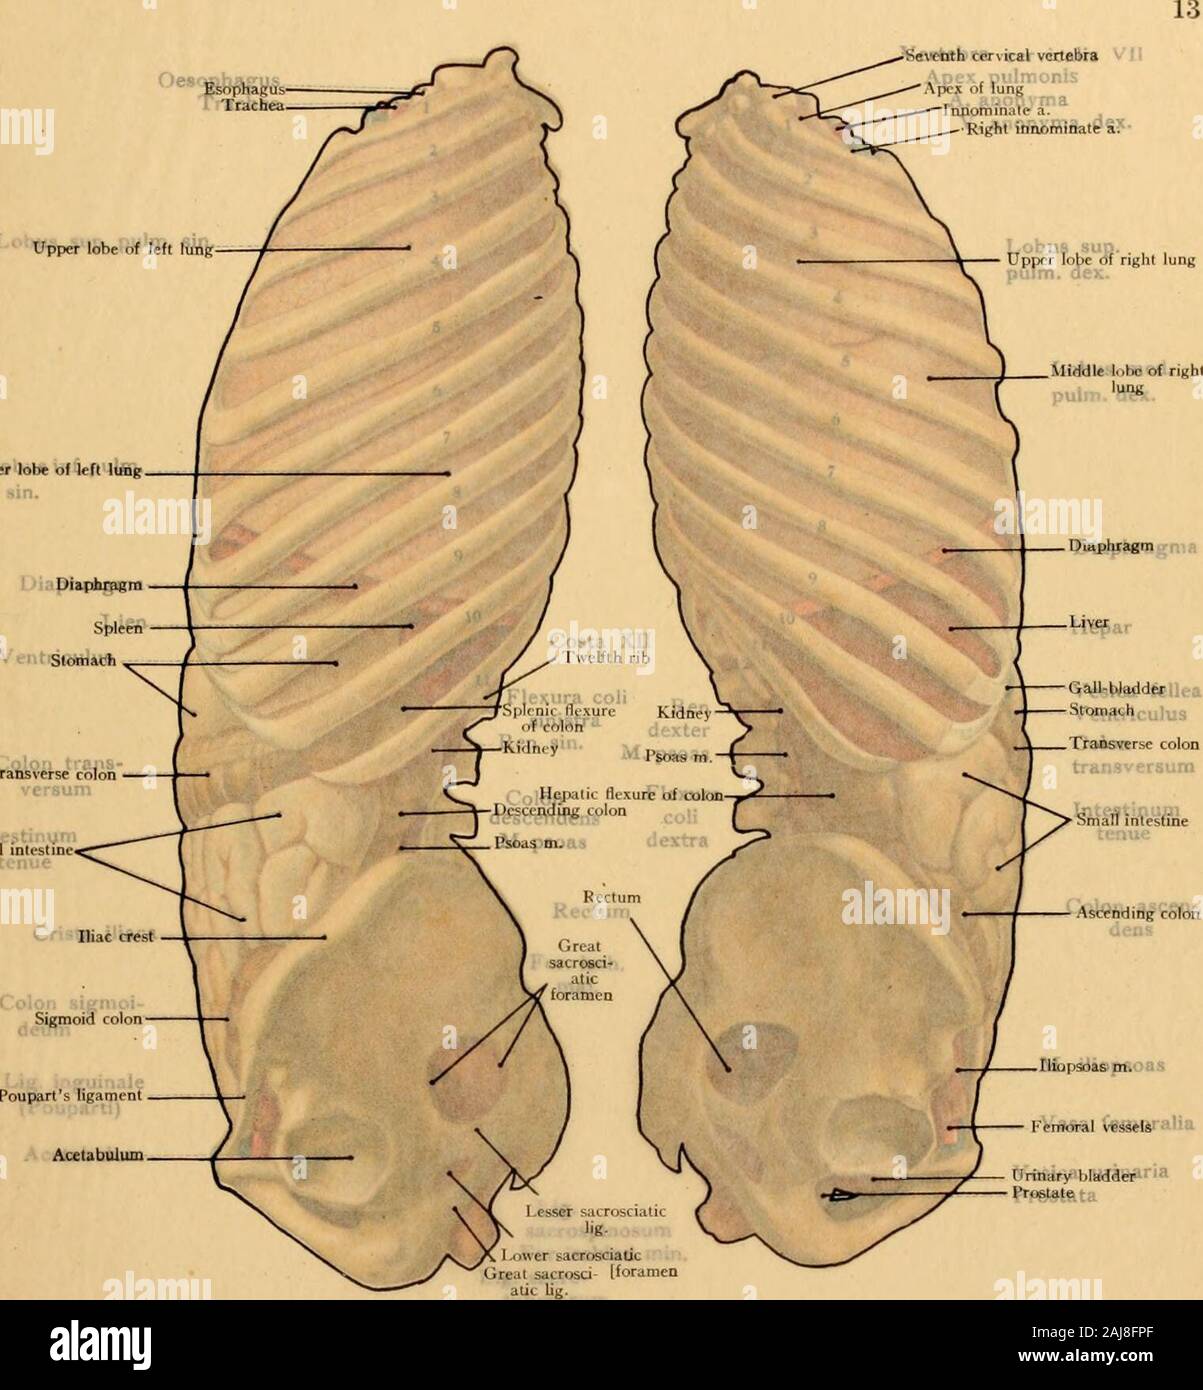 Atlas and text-book of topographic and applied anatomy . the anterior abdominal wall, since the blood from the inferior vena cavatries to reach the superior vena cava through the dilated superficial epigastric veins. The superficial veins of the abdominal wall form a subcutaneous venous plexus which com-municates with the area drained by the deep epigastric veins by means of numerous anastomosespassing through the abdominal wall (Fig. 55). These anastomoses are also directly con-nected with the portal vein, on the inferior surface of the liver, by four or five smallparumbilical veins (accessor Stock Photo